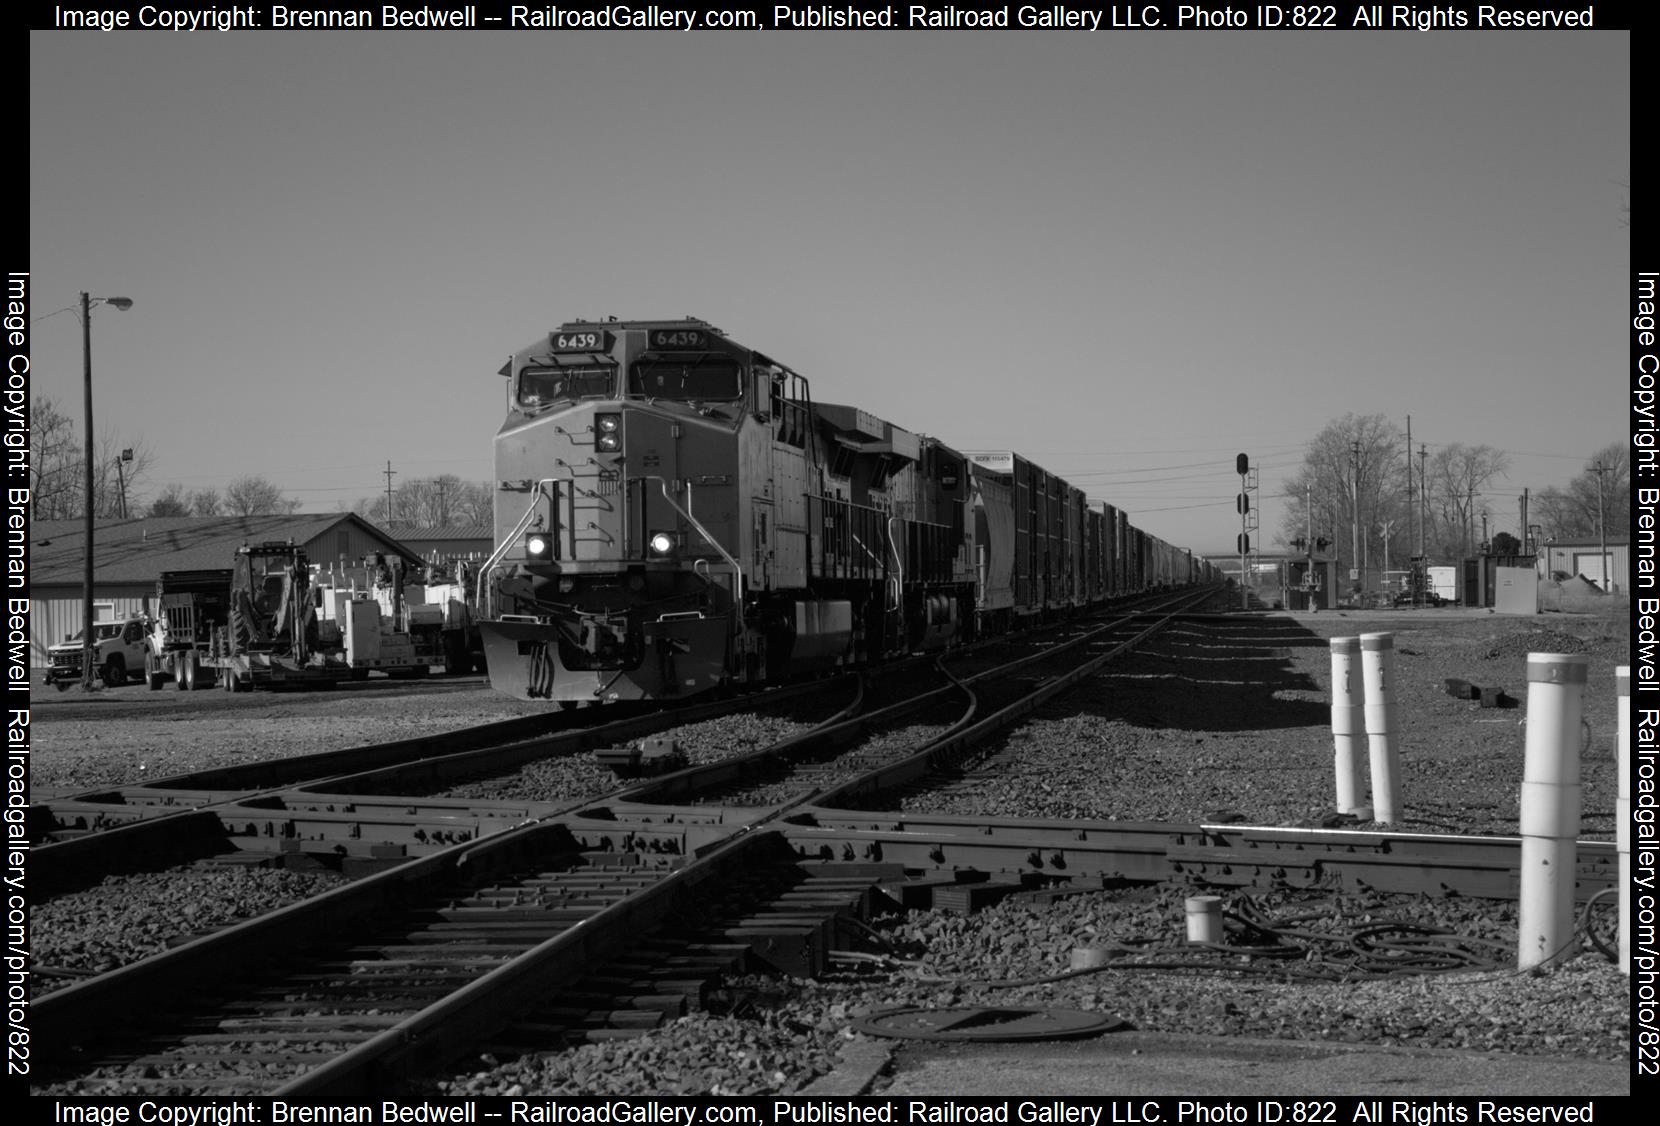 UP 6439 is a class AC44CW and  is pictured in Effingham, Illinois, United States.  This was taken along the St Louis Line on the Union Pacific Railroad. Photo Copyright: Brennan Bedwell uploaded to Railroad Gallery on 03/10/2023. This photograph of UP 6439 was taken on Sunday, February 12, 2023. All Rights Reserved. 